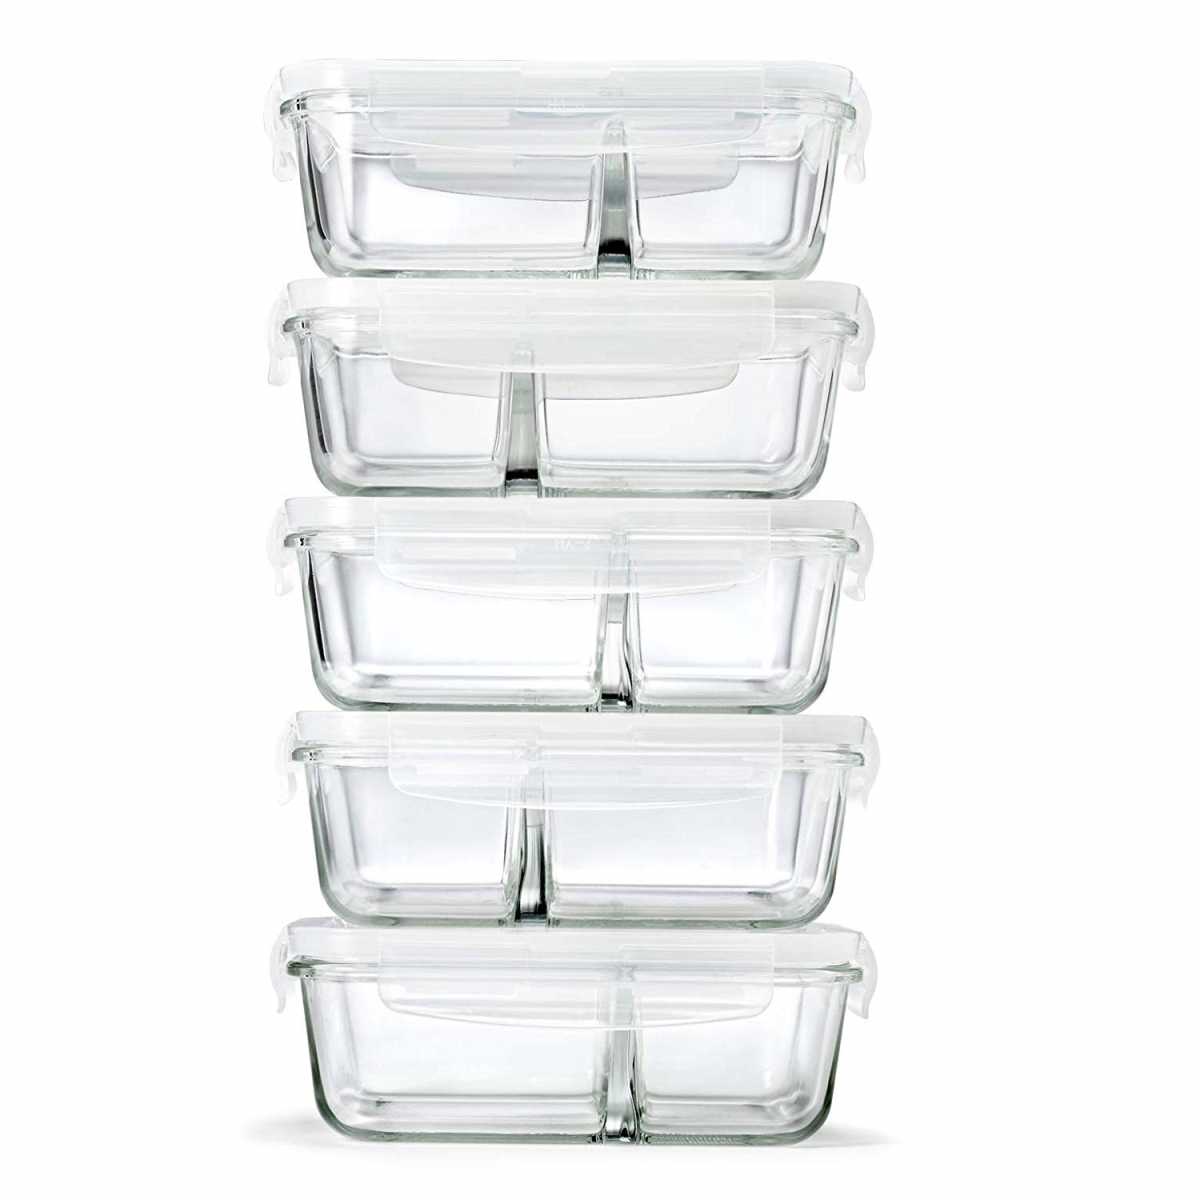 873gff 37.17 Oz Dual Chamber Divided Glass Containers, Set Of 5